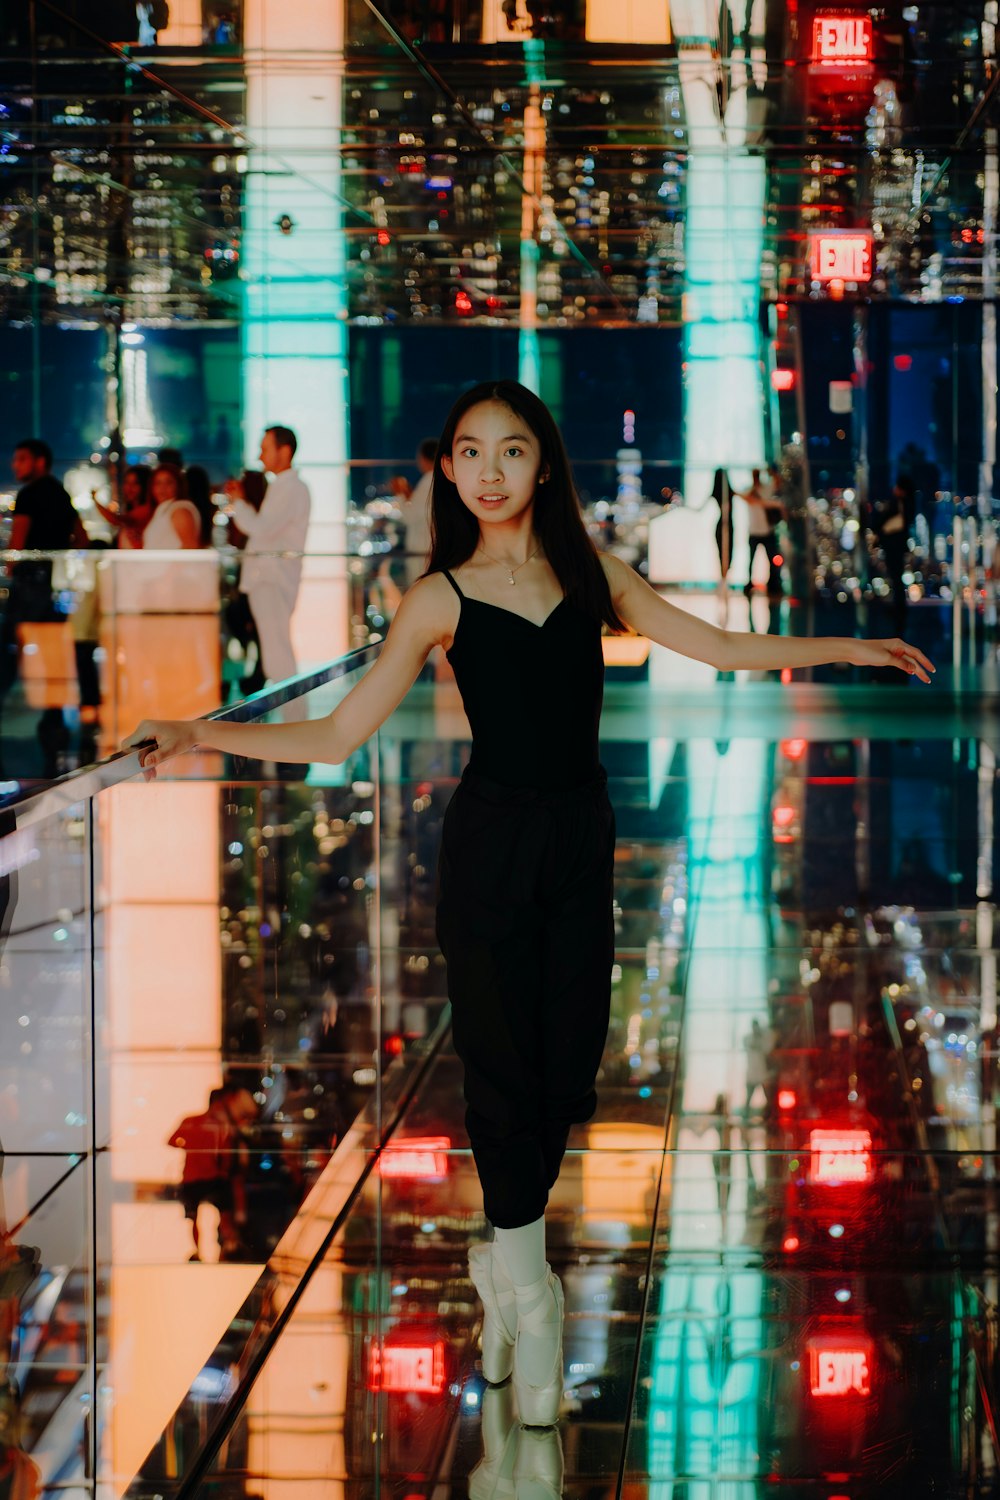 a woman in a black dress standing on a glass floor